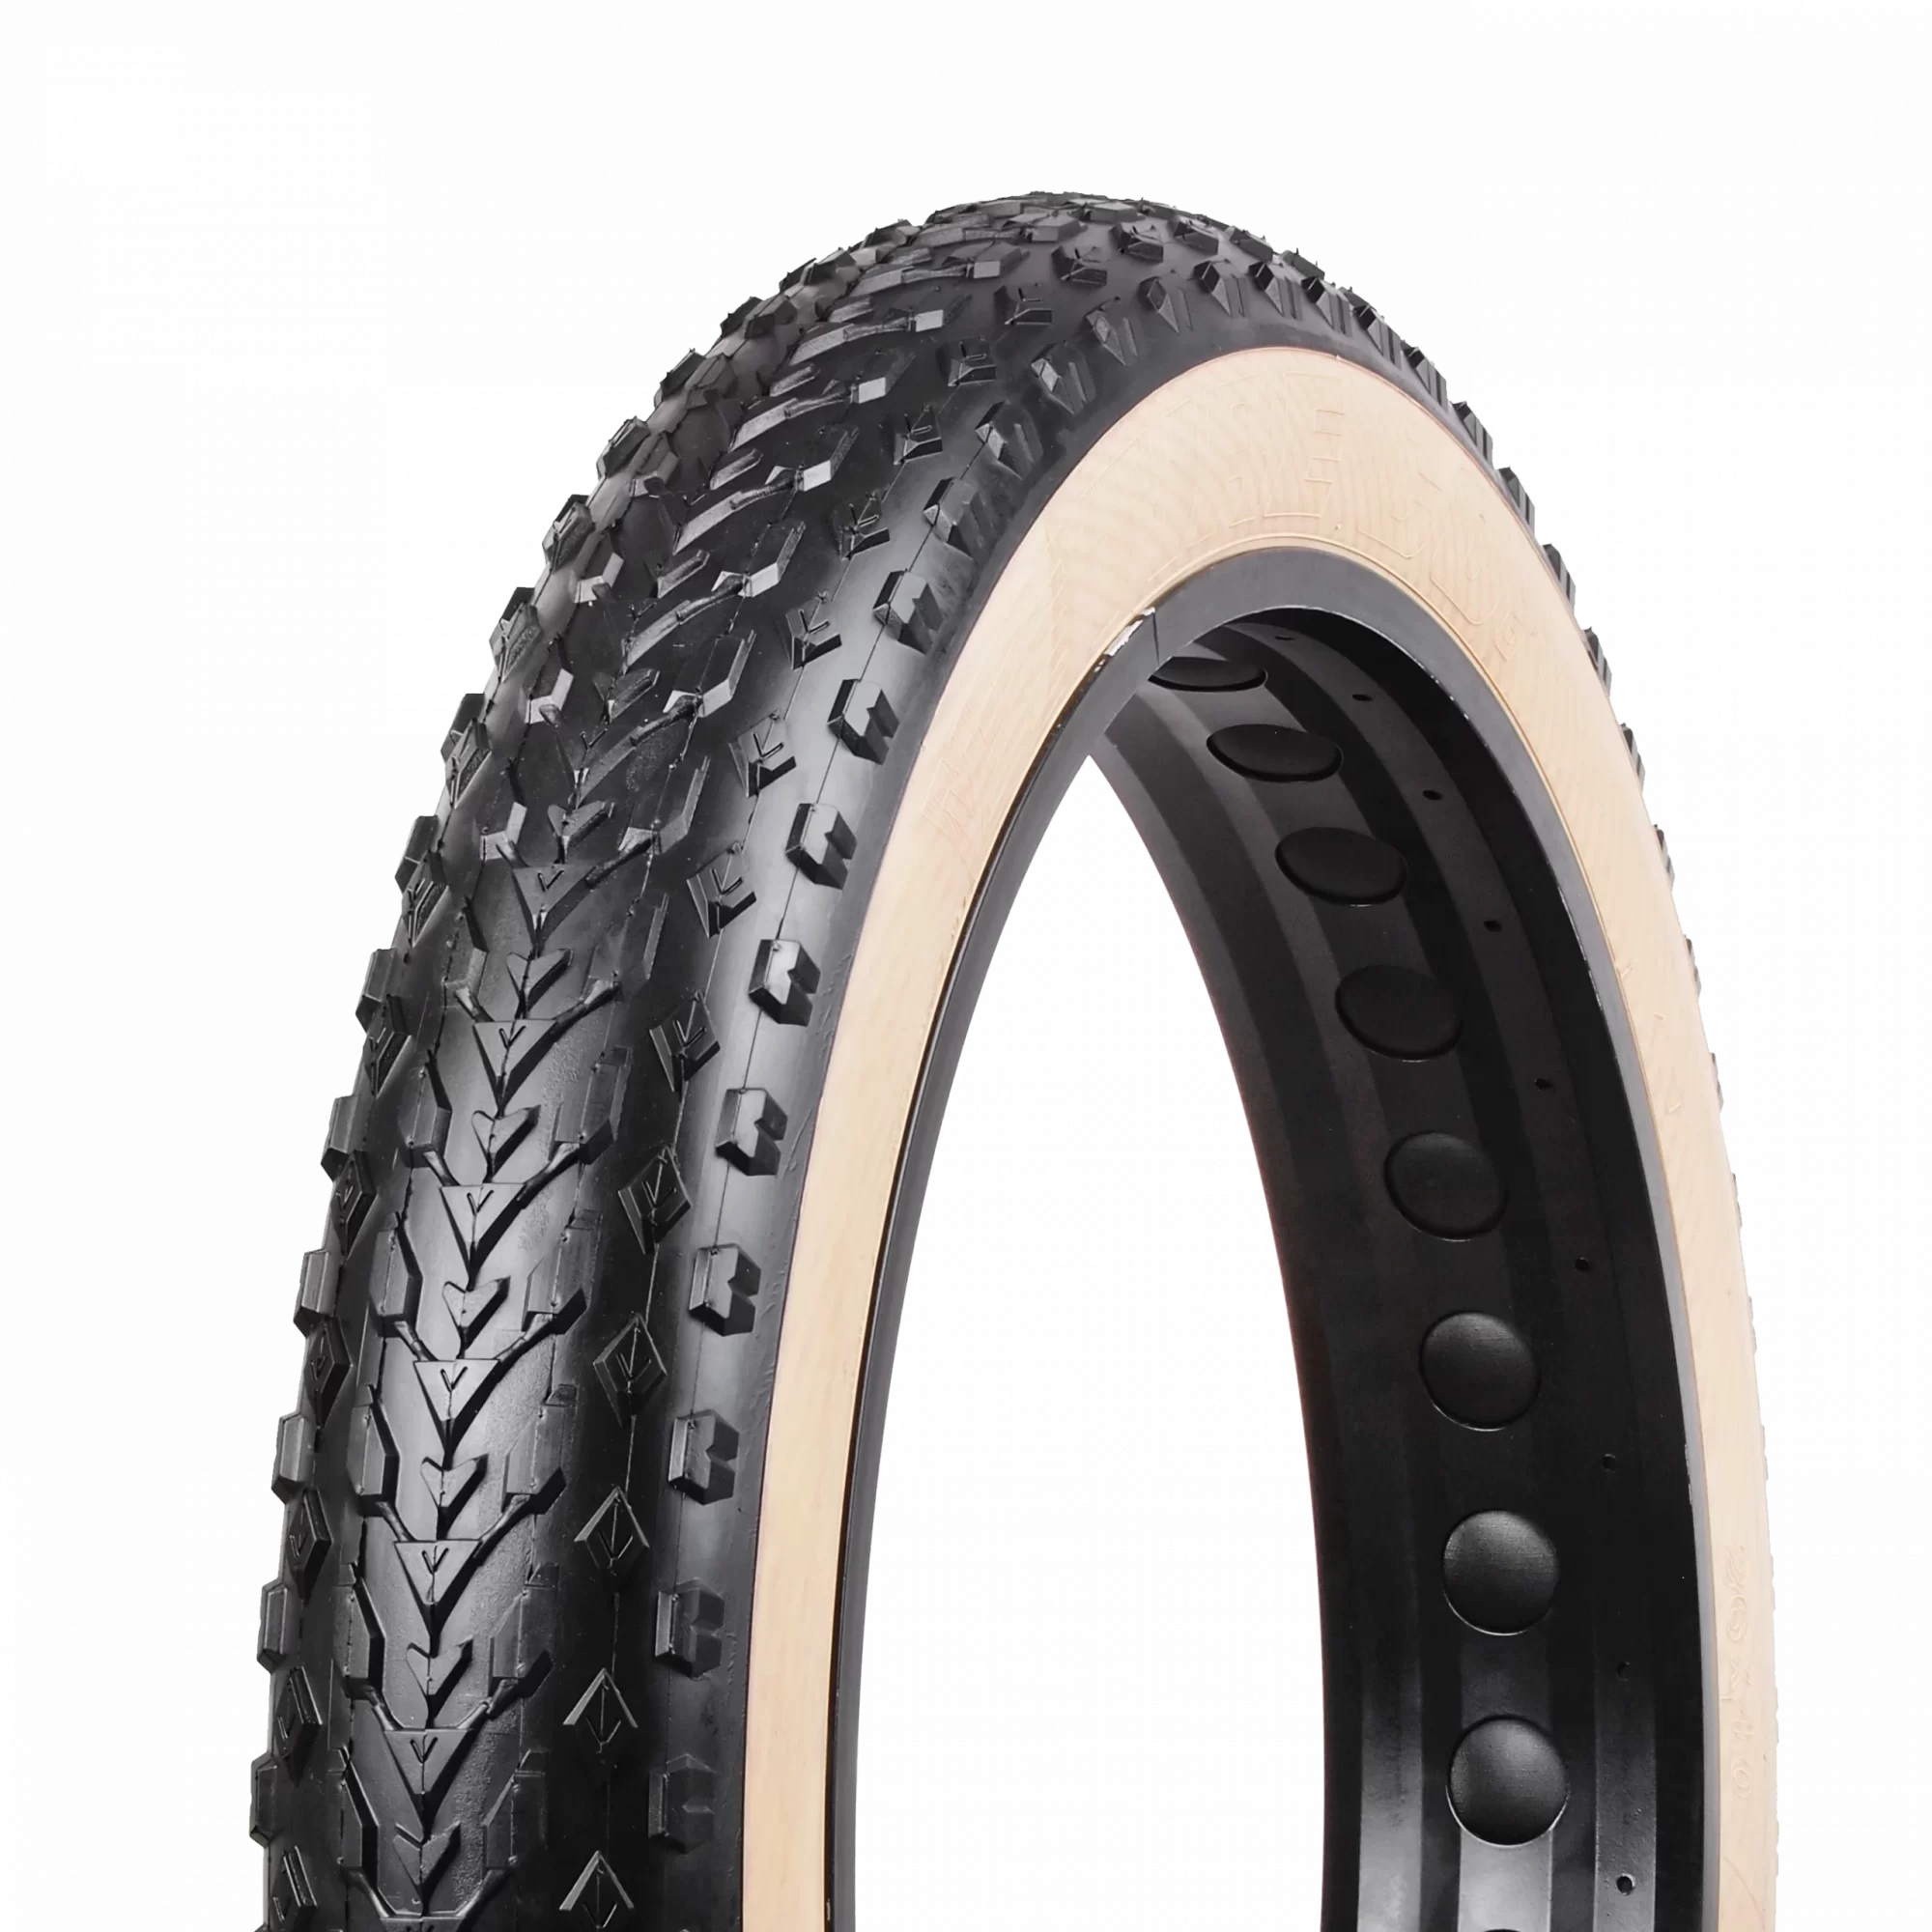 Vee Tire Mission Command Natural Sidewall